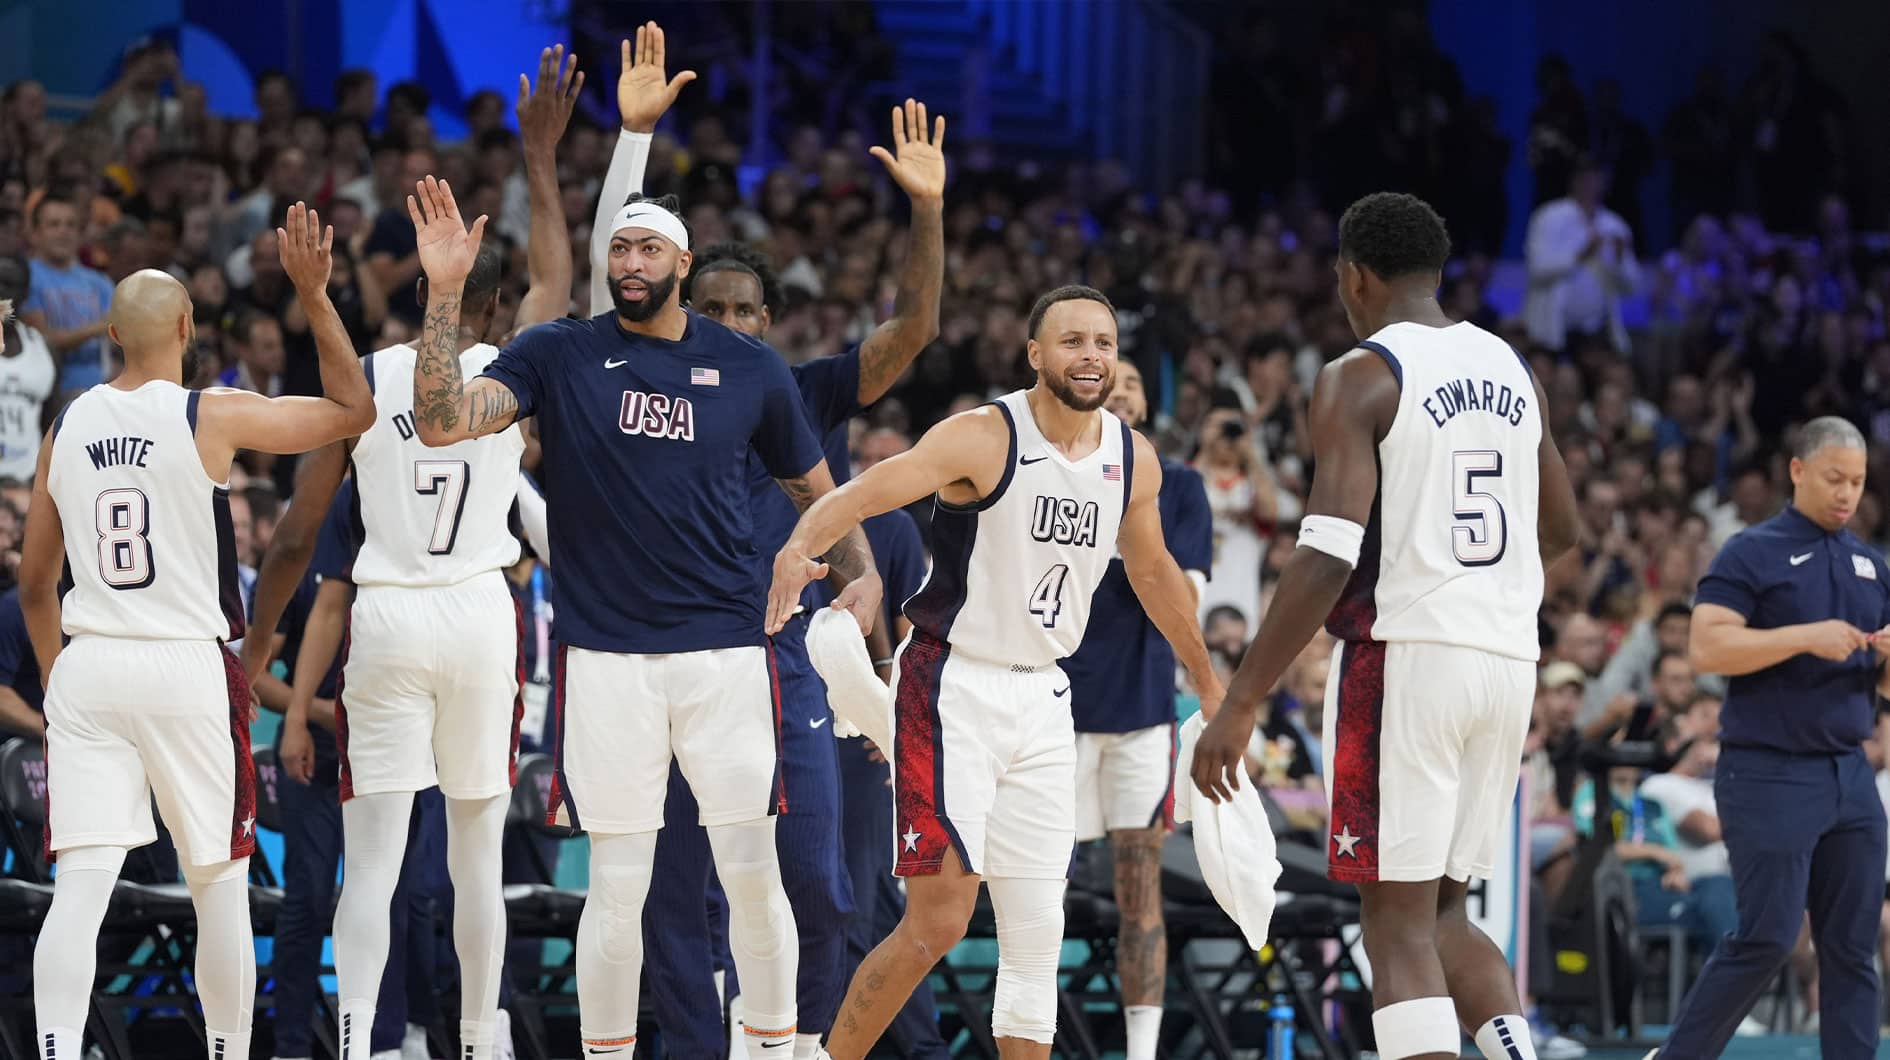  United States shooting guard Stephen Curry (4) celebrates with guard Anthony Edwards (5) after a time out in the first quarter against South Sudan during the Paris 2024 Olympic Summer Games at Stade Pierre-Mauroy